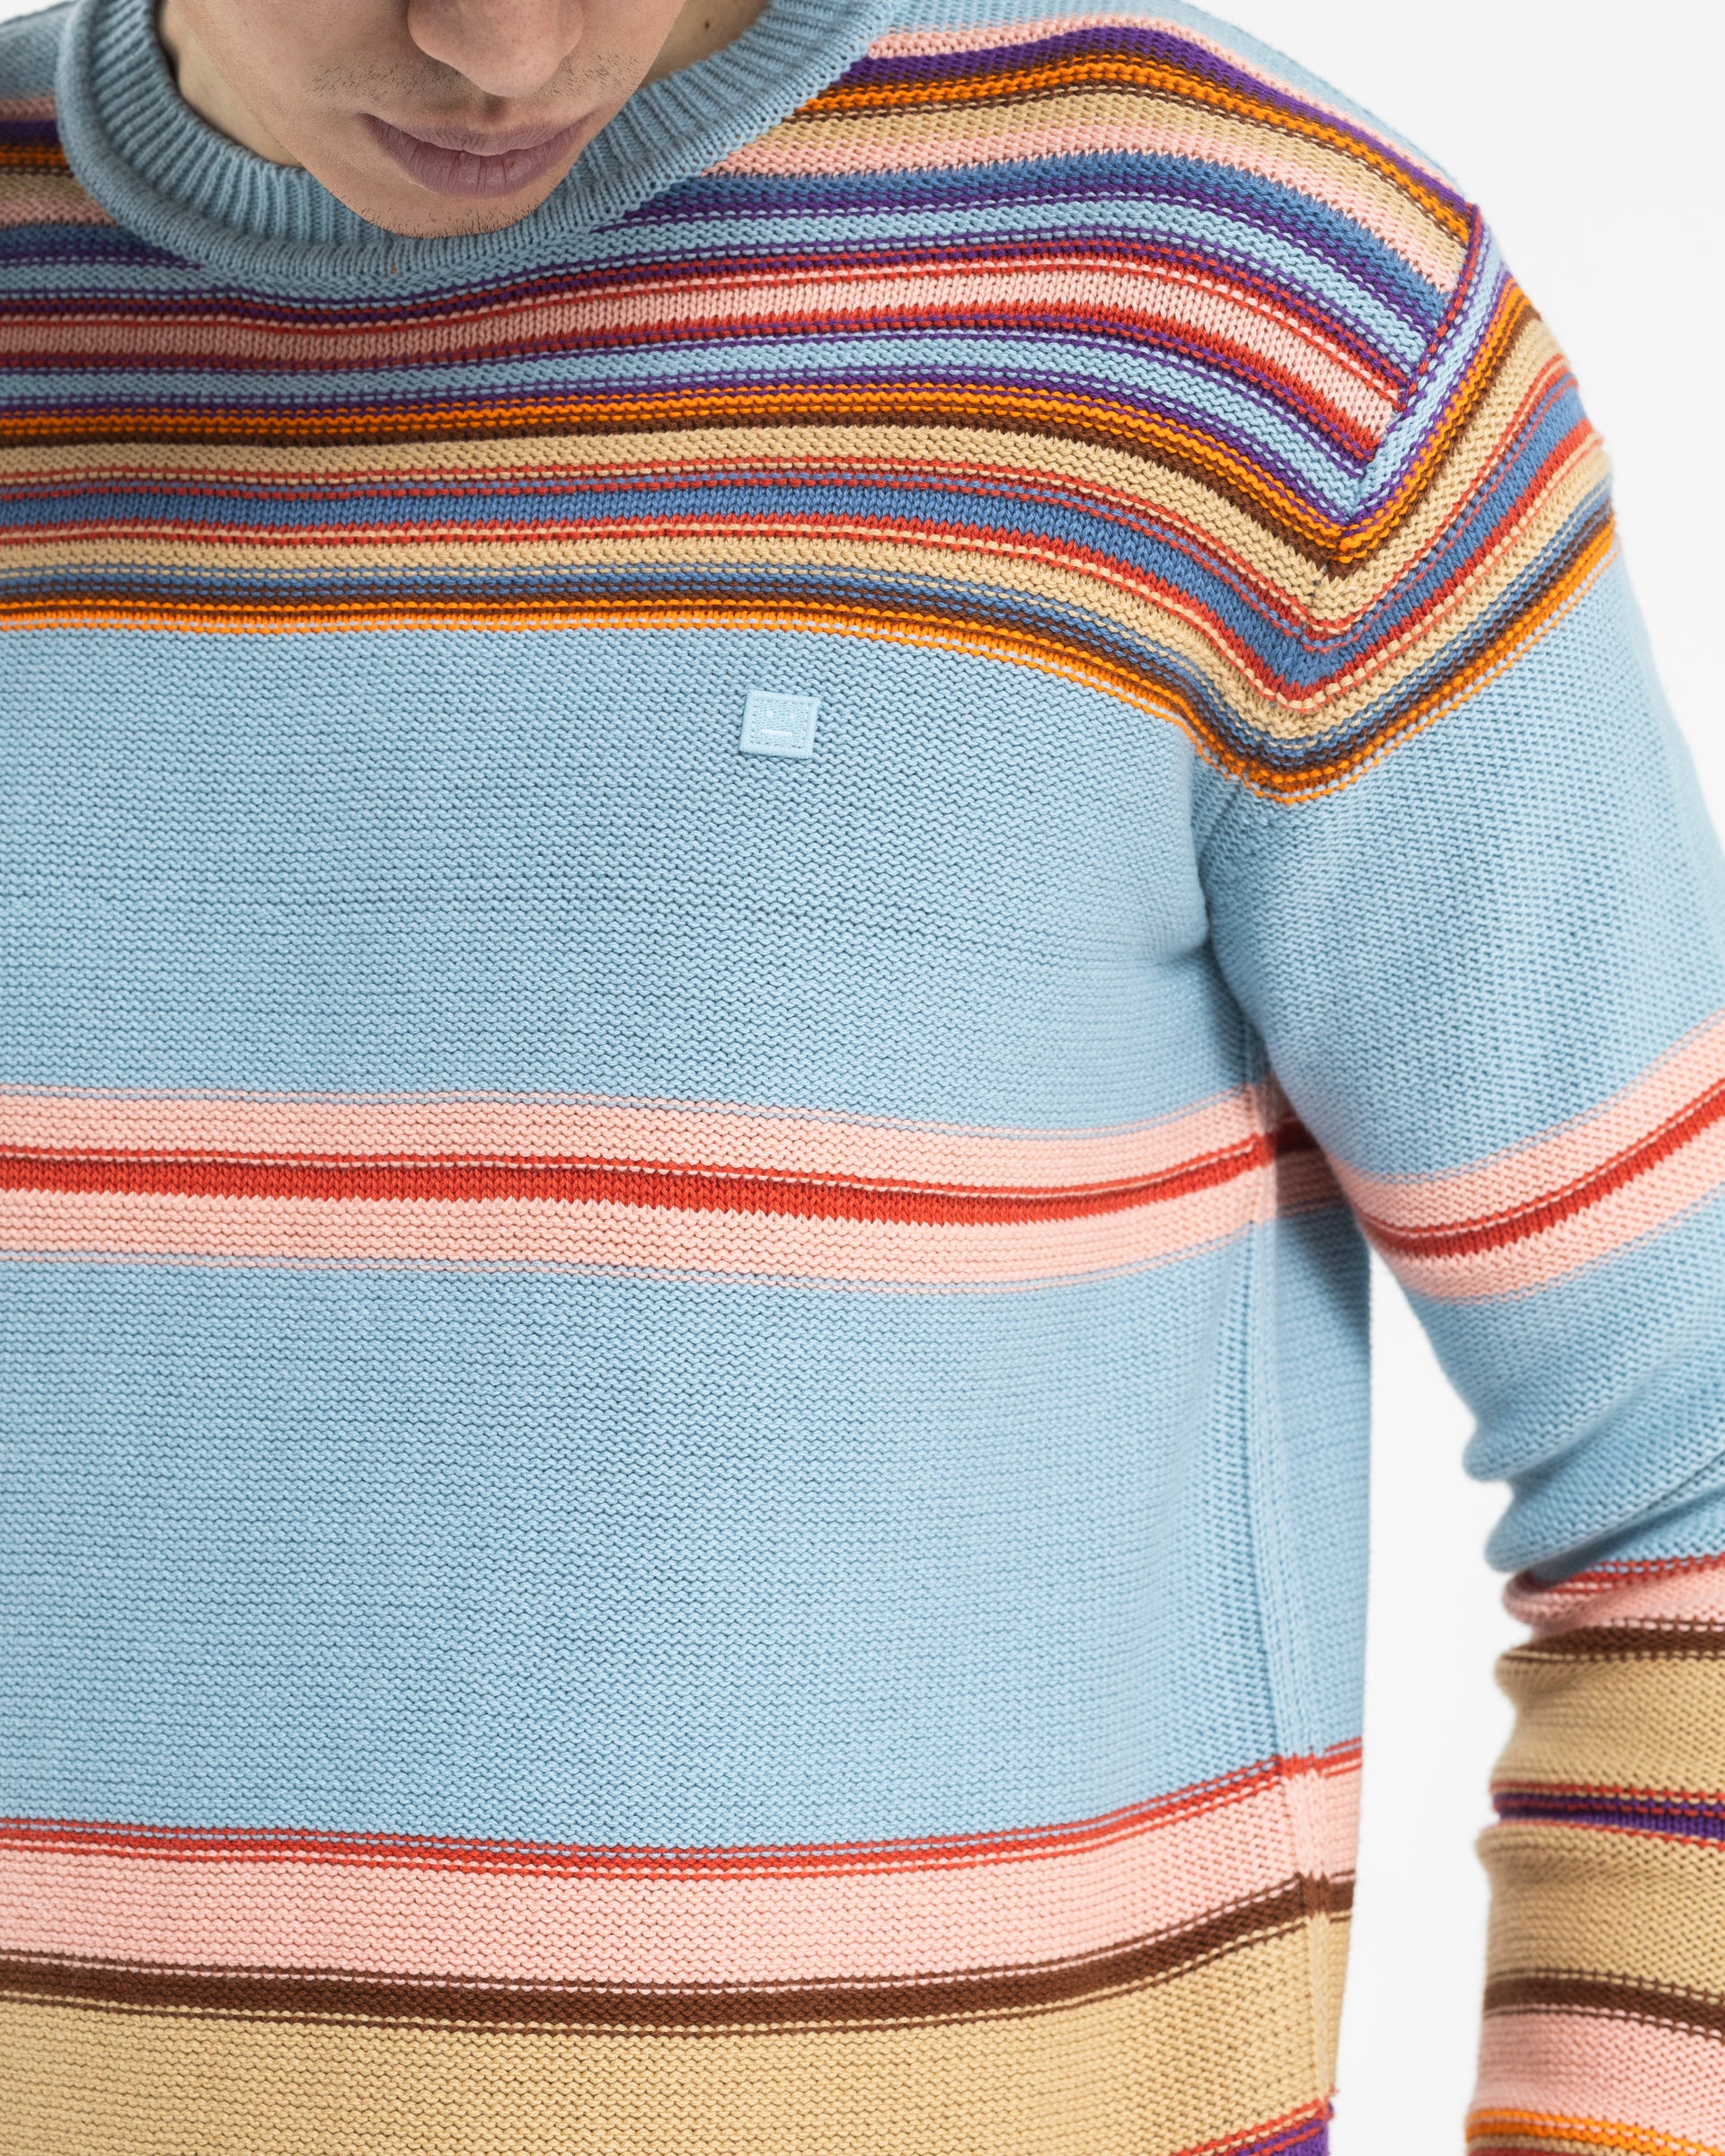 Crew Neck Knit Jumper in Dusty Blue and Multi